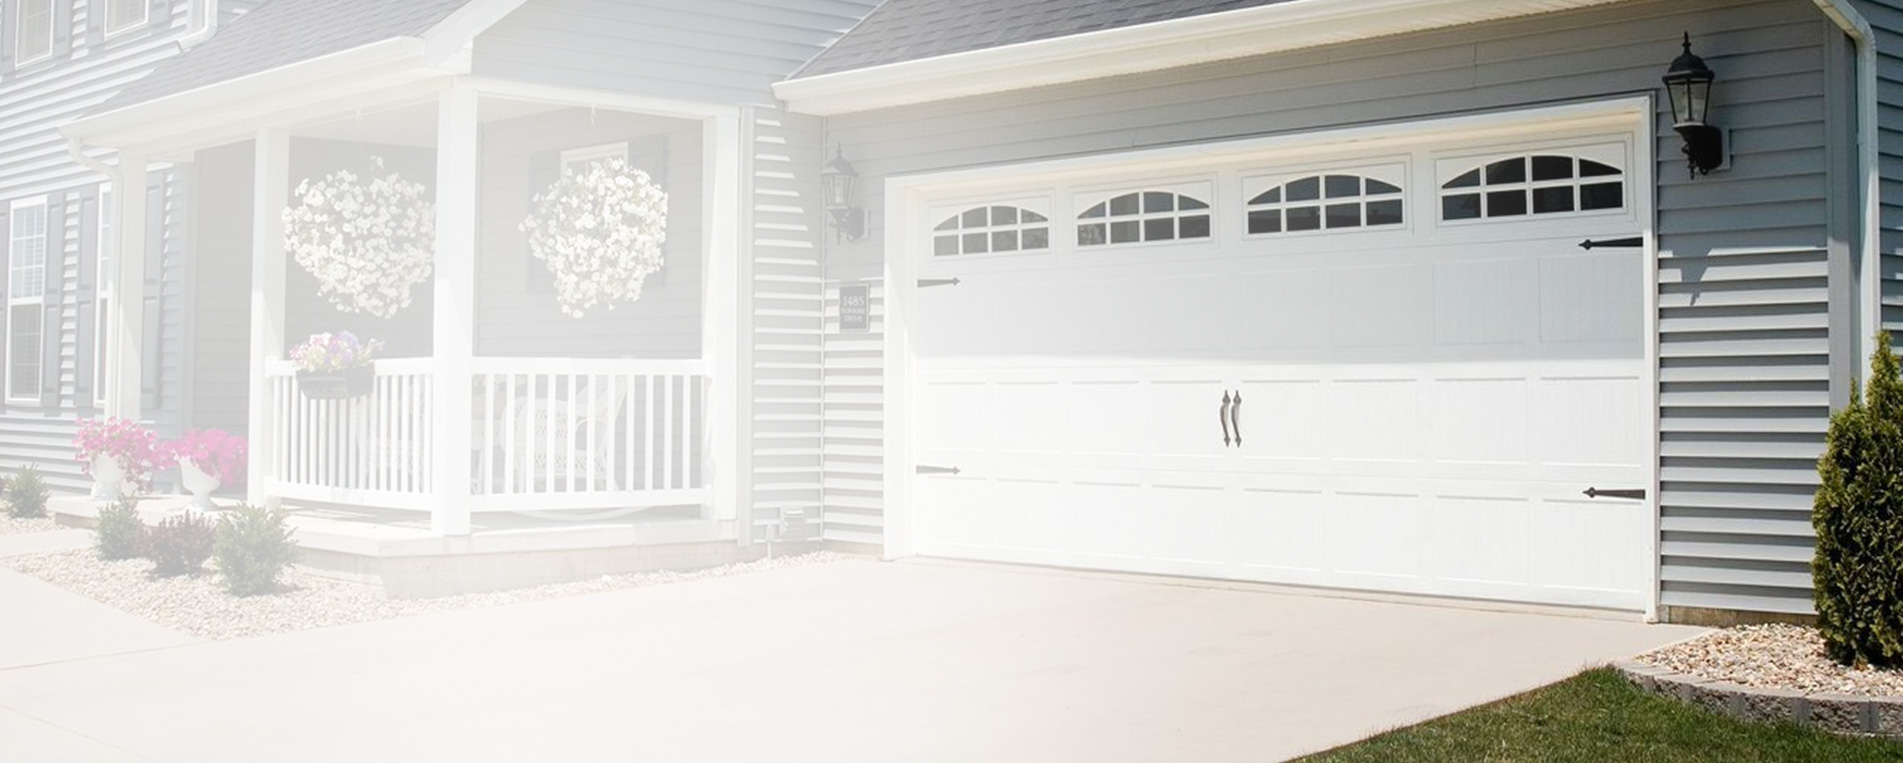 Frequently Asked Questions About Garage Doors